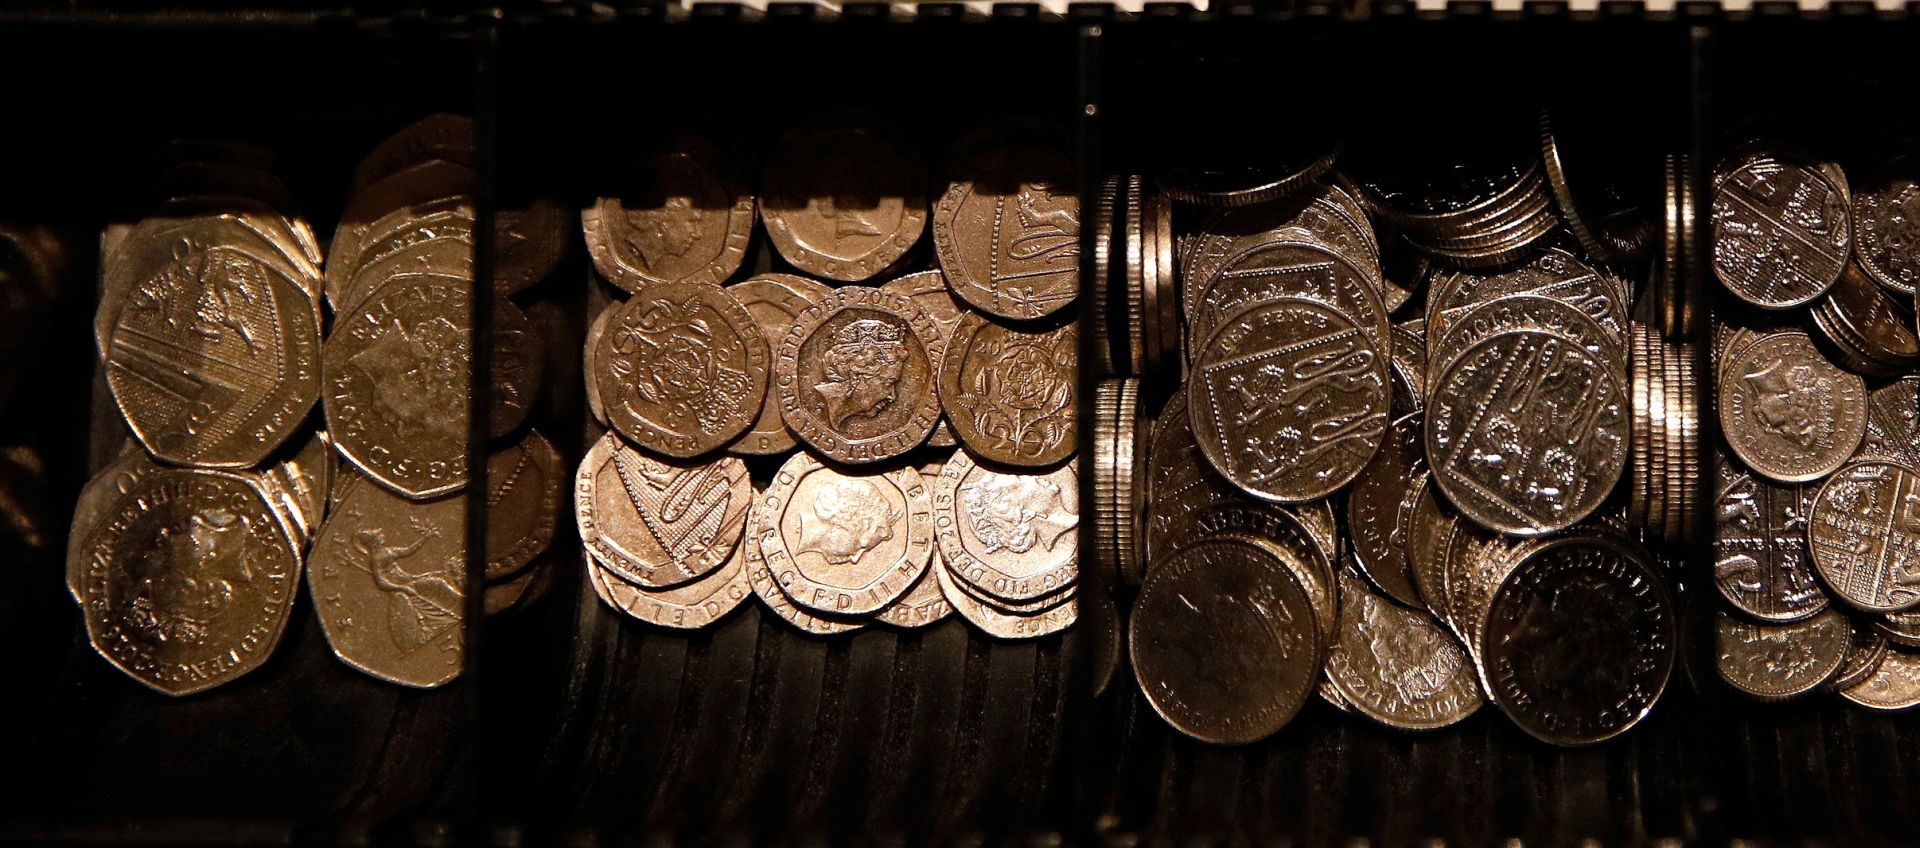 Pound Sterling notes and change are seen inside a cash resgister in a coffee shop in Manchester Pound Sterling notes and change are seen inside a cash resgister in a coffee shop in Manchester, Britain, Septem,ber 21, 2018. REUTERS/Phil Noble PHIL NOBLE